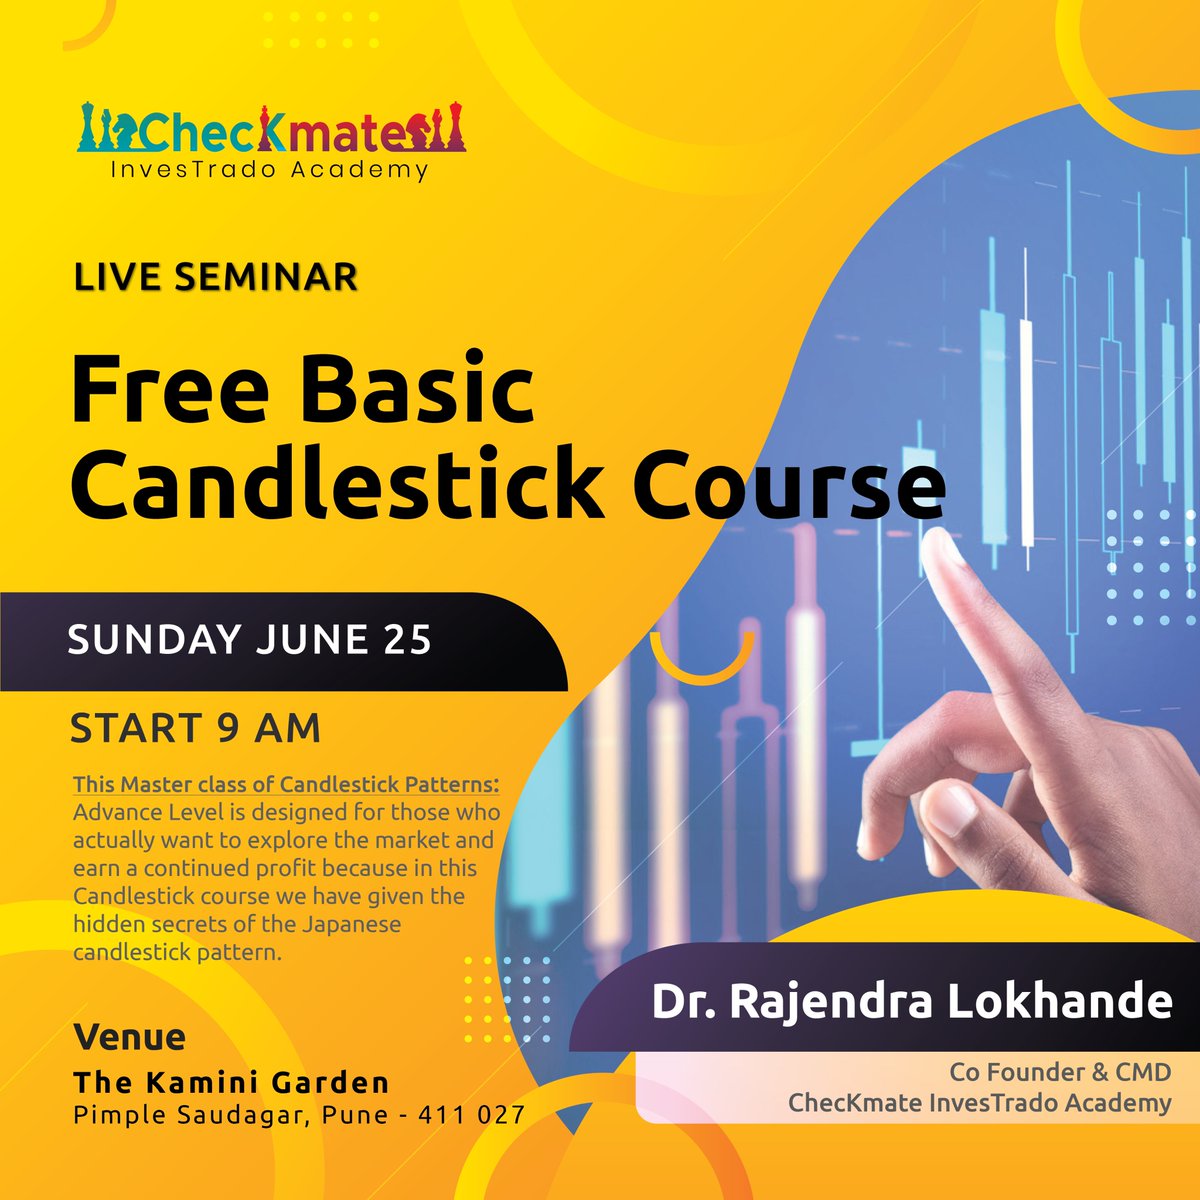 Ignite your trading potential with Candlestick Charts! Join us for a FREE Basic Candlestick Course hosted by Dr. Rajendra Lokhande on June 25. Don't miss this opportunity to unlock market secrets and boost your investment strategy. #CandlestickMastery #stockmarkets #FreeWorkshop